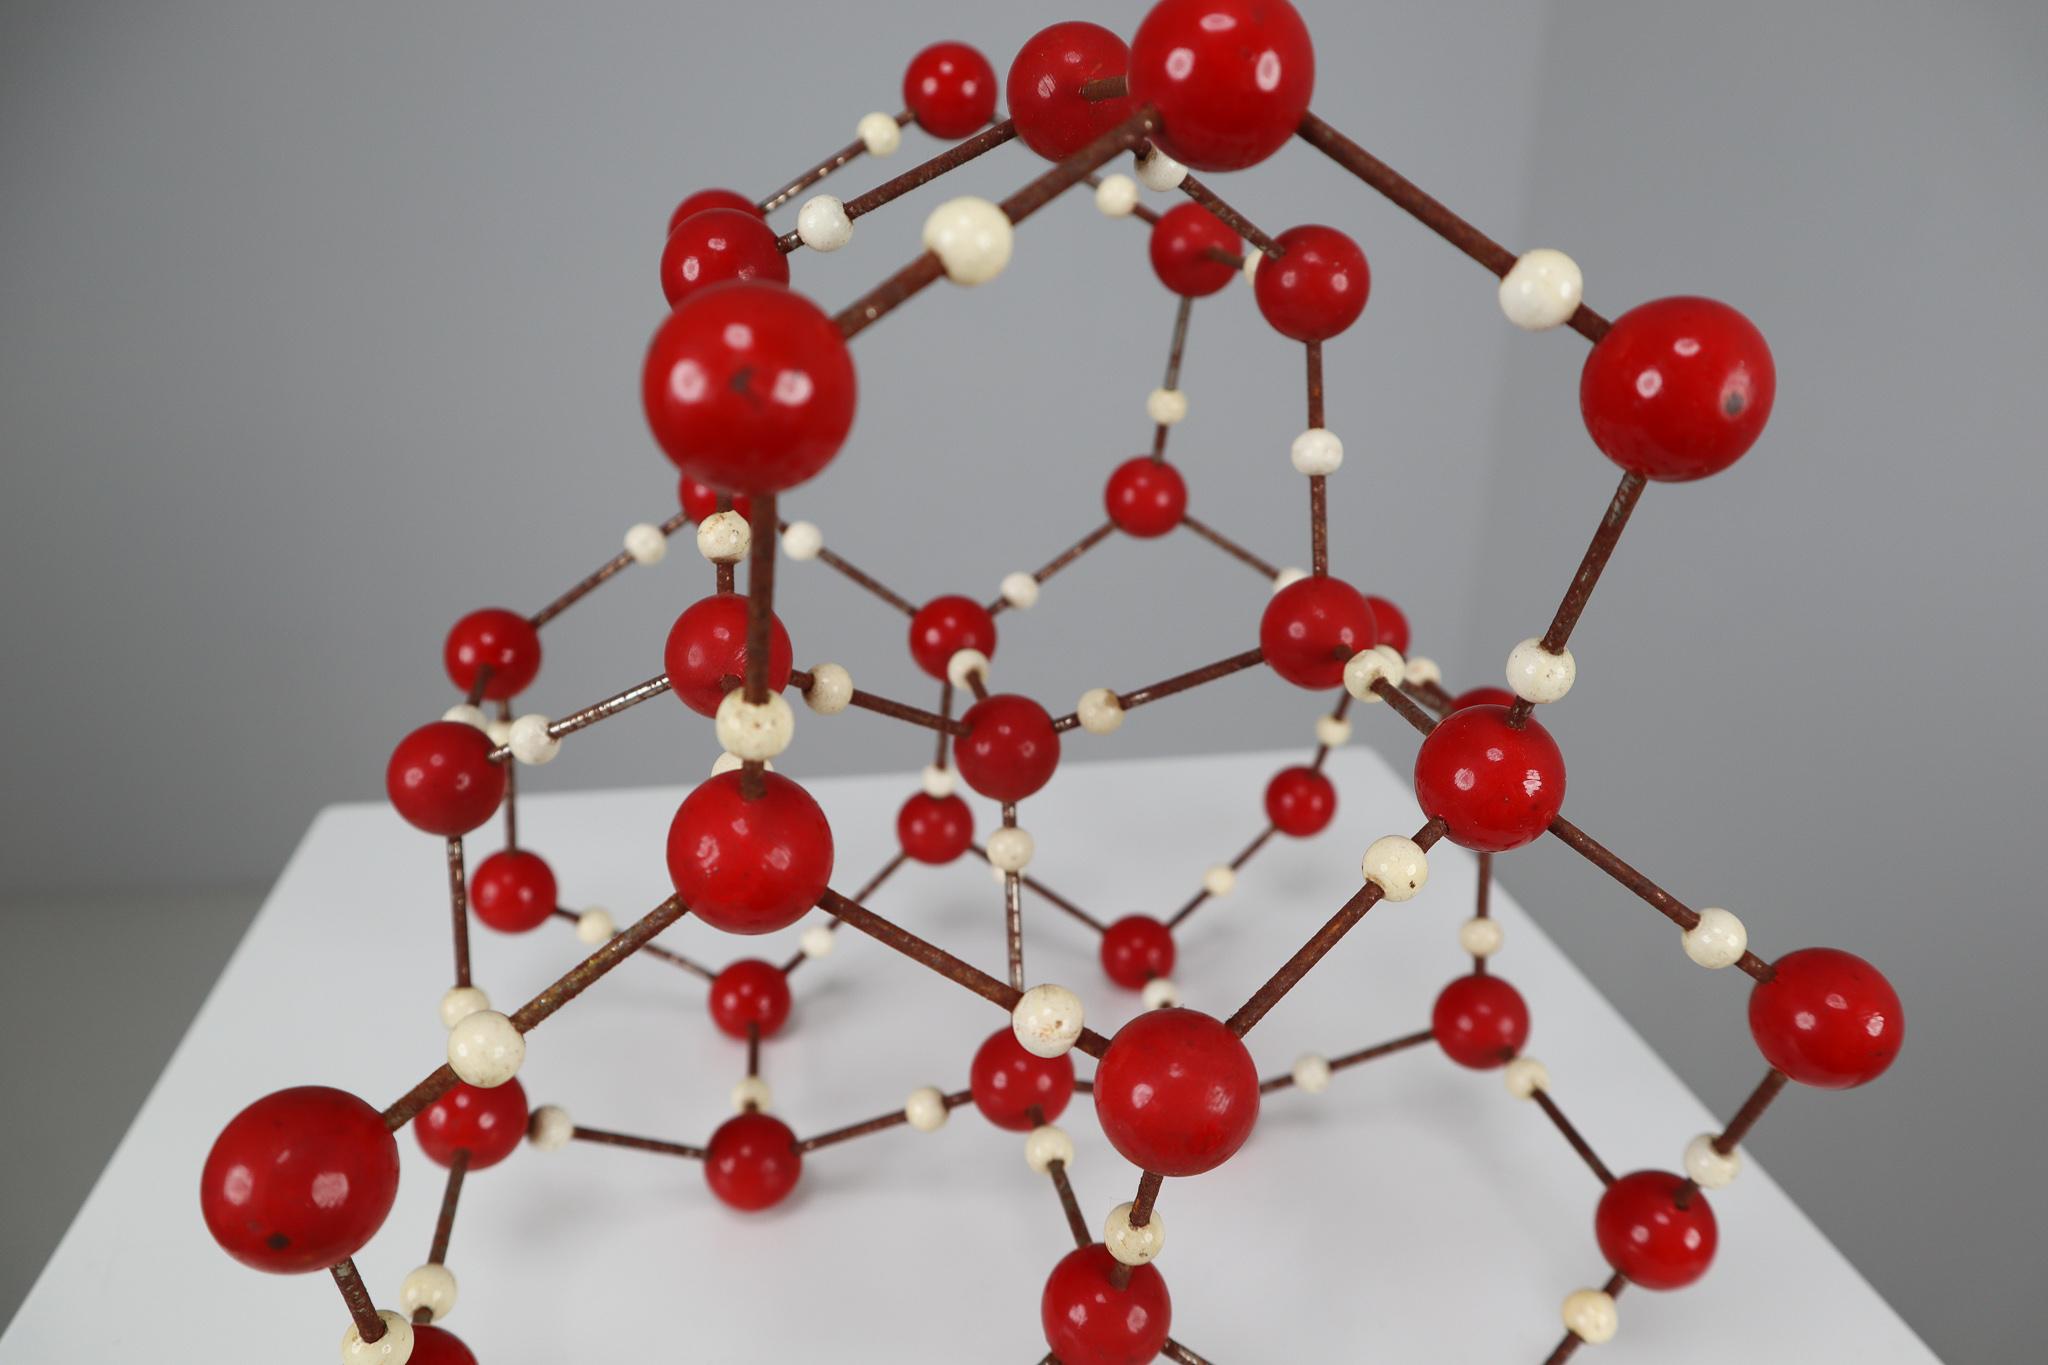 Mid-Century Modern Midcentury Molecular Structure for Didactic Purposes Made in the 1950s